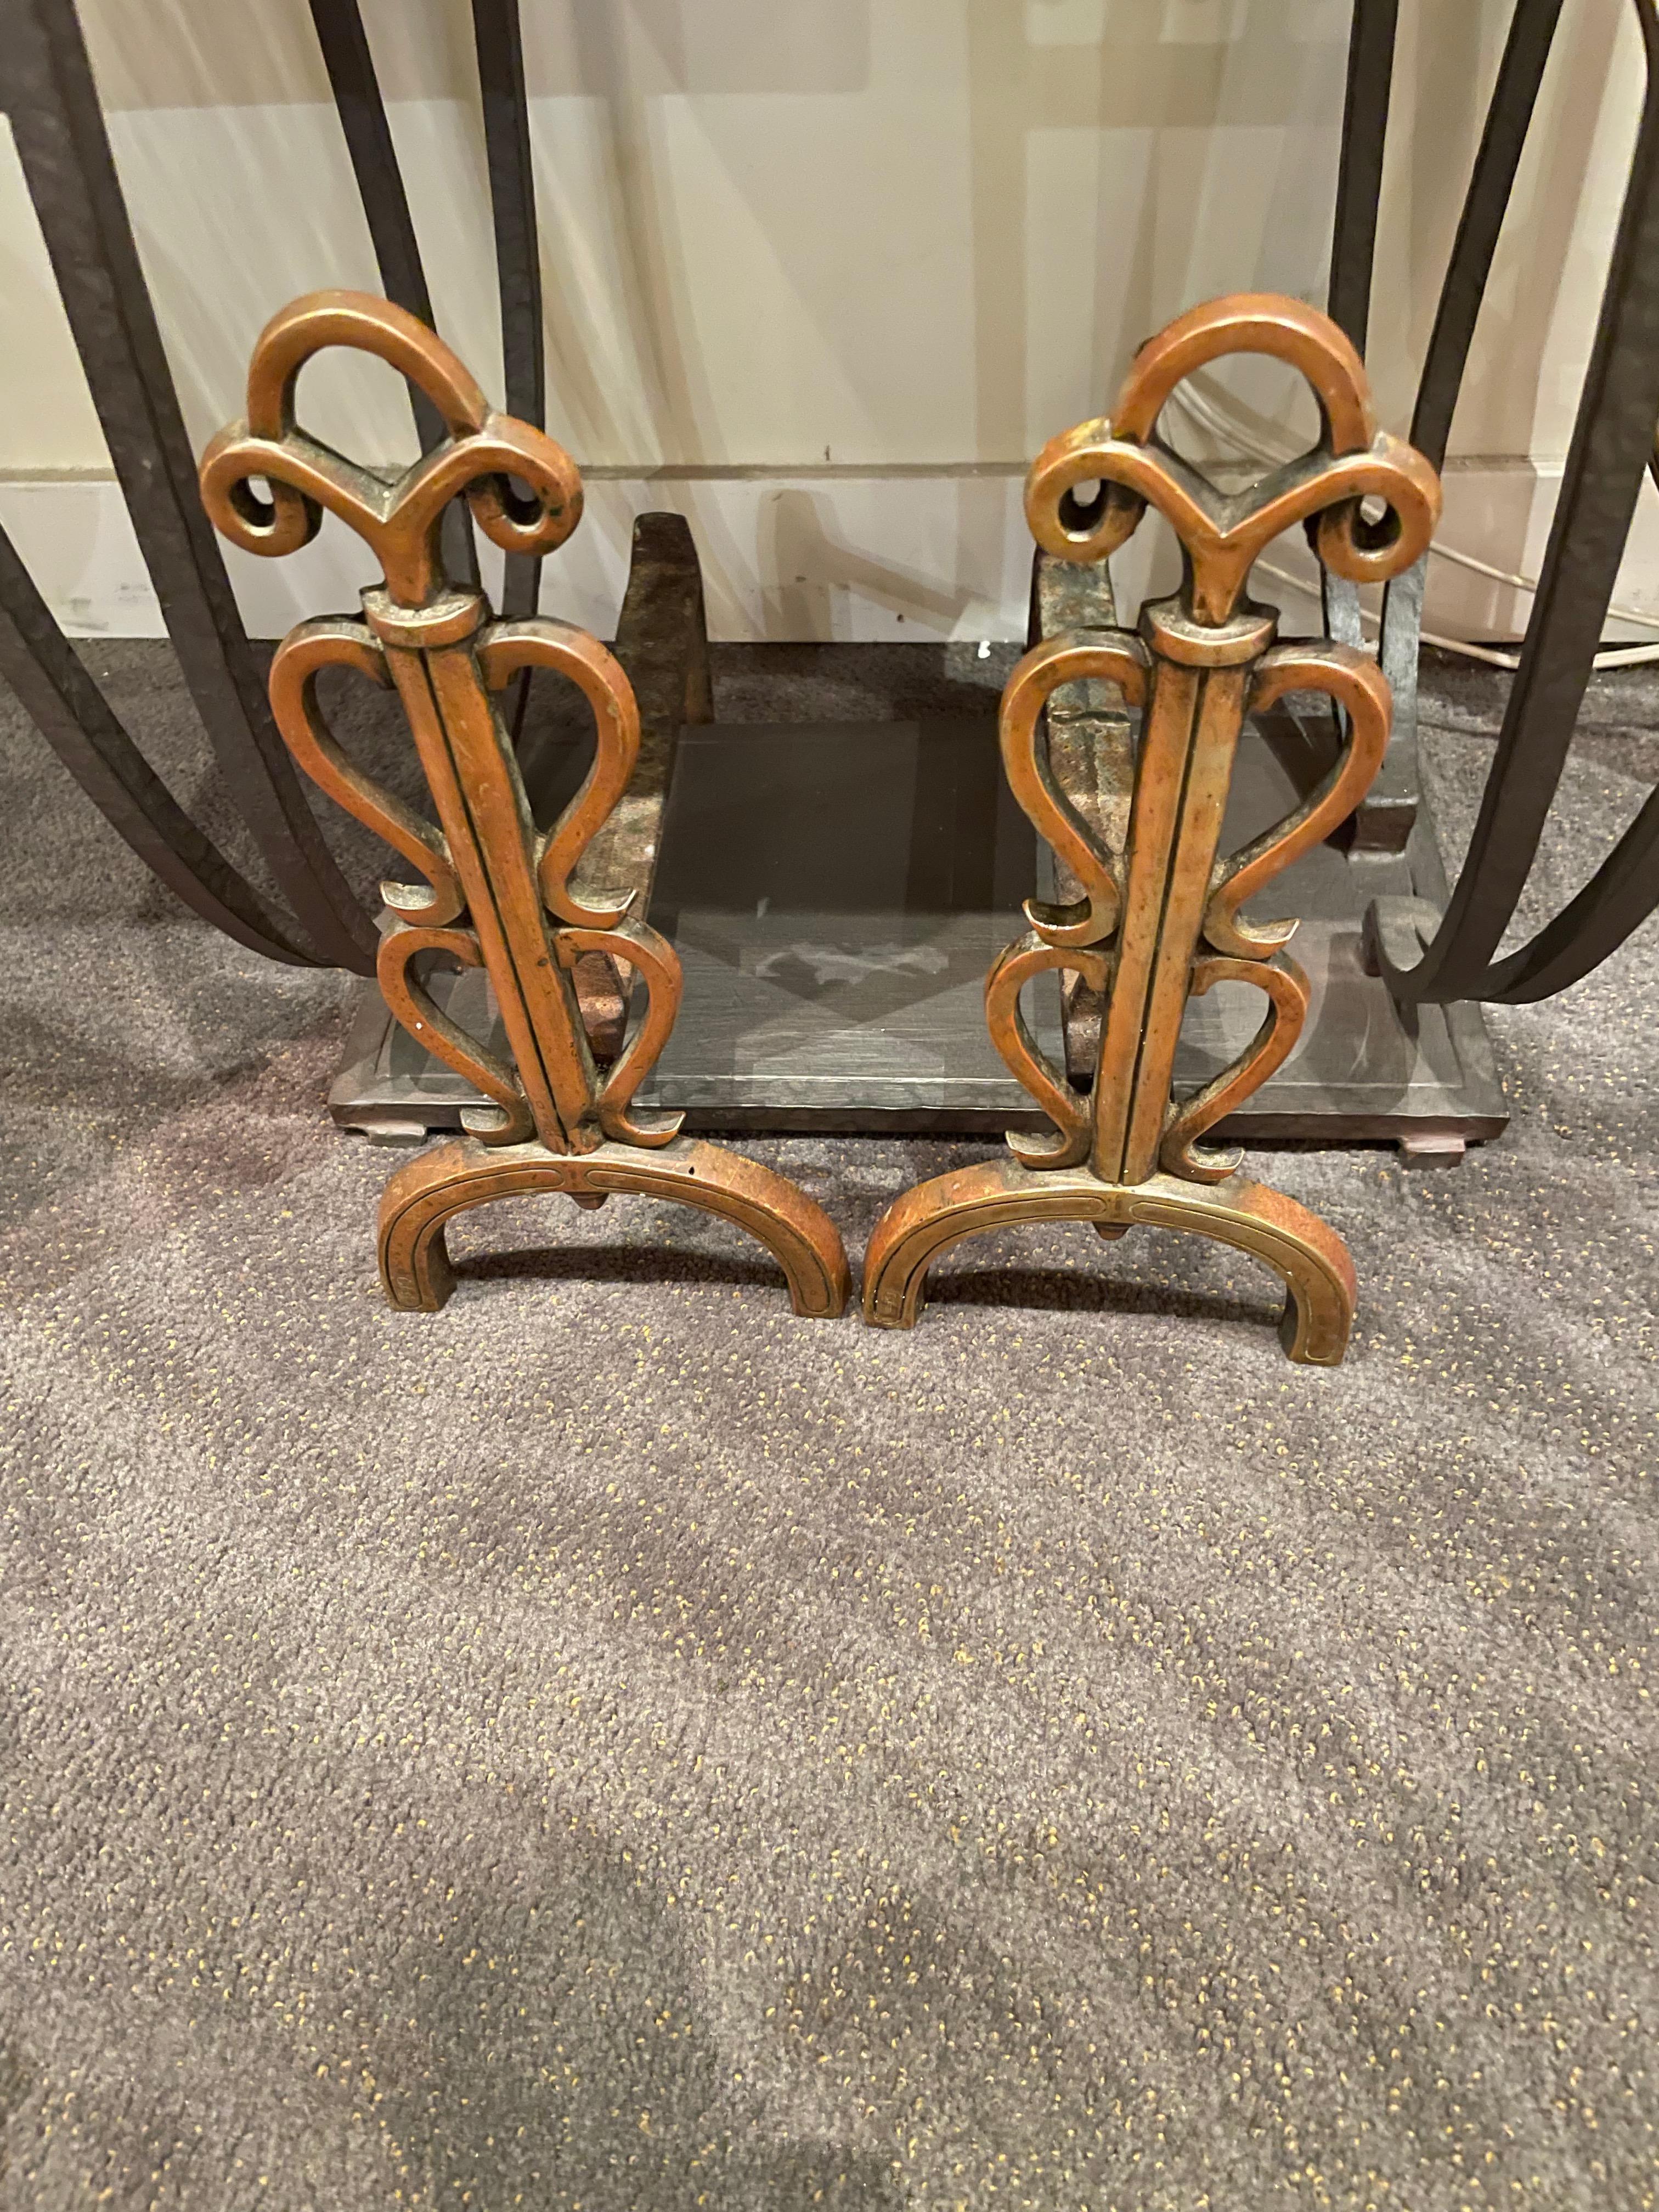 French Art Deco Original andirons, unusual pair with lovely details that feature design influences combining architectural elements, skyscraper, stepped motif, and arts and crafts. A nice bronzy hand-forged finish features a heart-shaped pattern